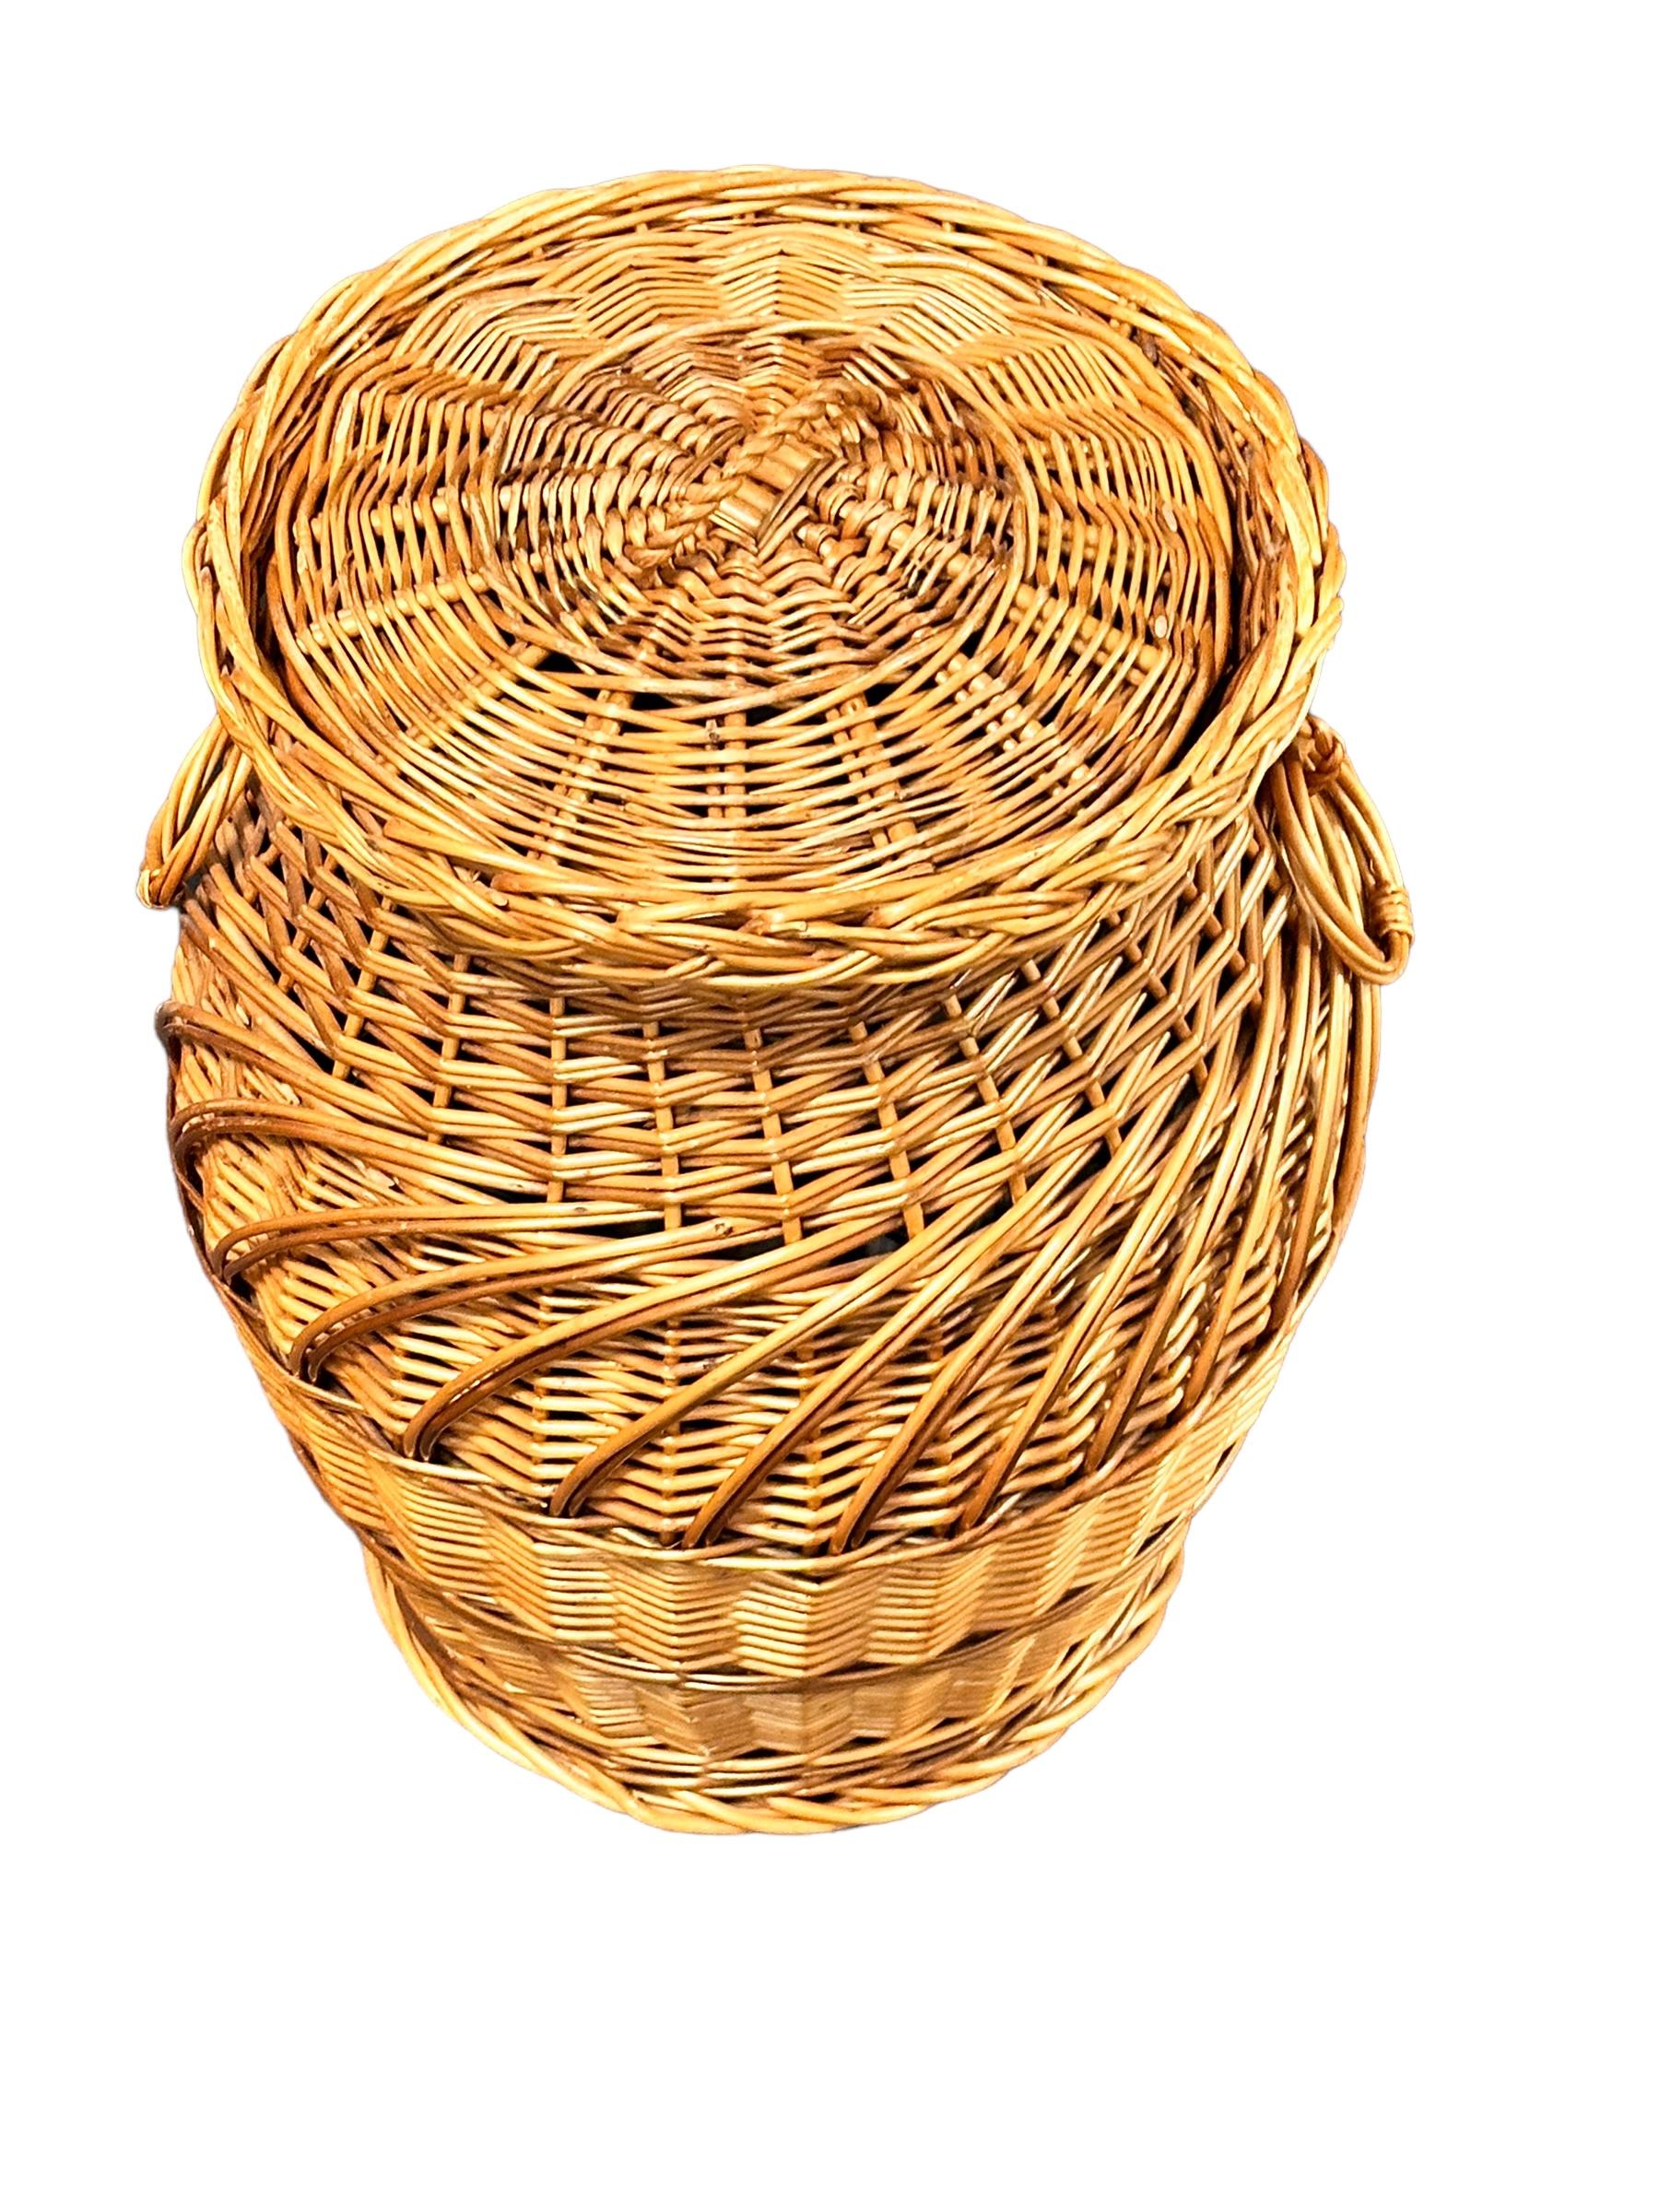 Offered is an absolutely stunning 1960s vintage wicker laundry basket hamper with lid and wicker handles. Overall very good vintage condition with light ware consistent with age and use. Found at an Estate Sale in Nuremberg, Germany. A nice addition